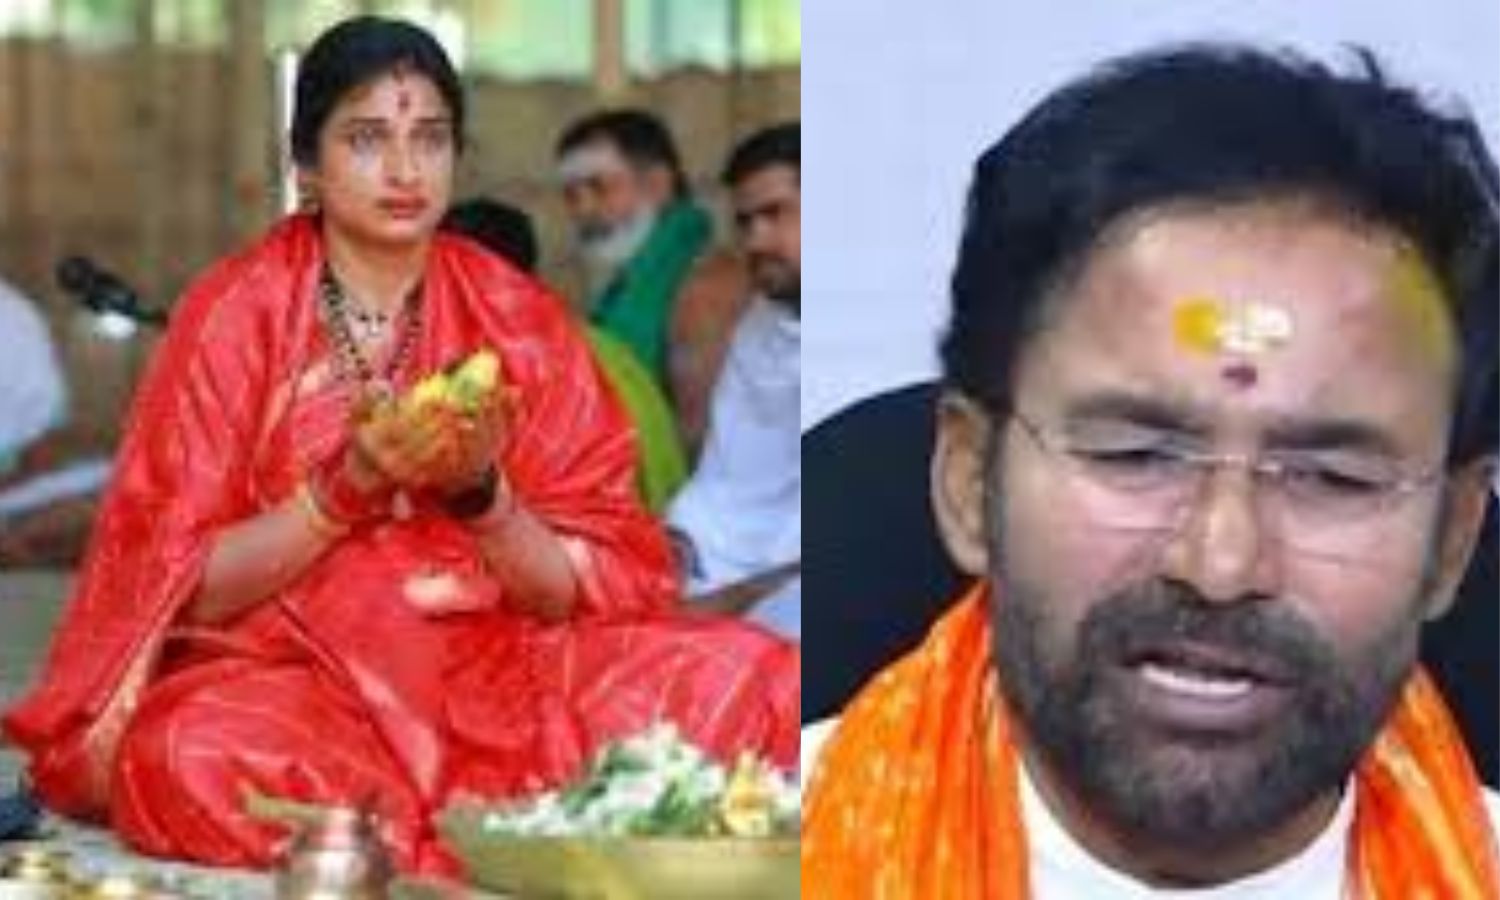 Counting Day Bjp Leaders, Kishan Reddy And Madhavi Latha Visit Temples In Hyderabad